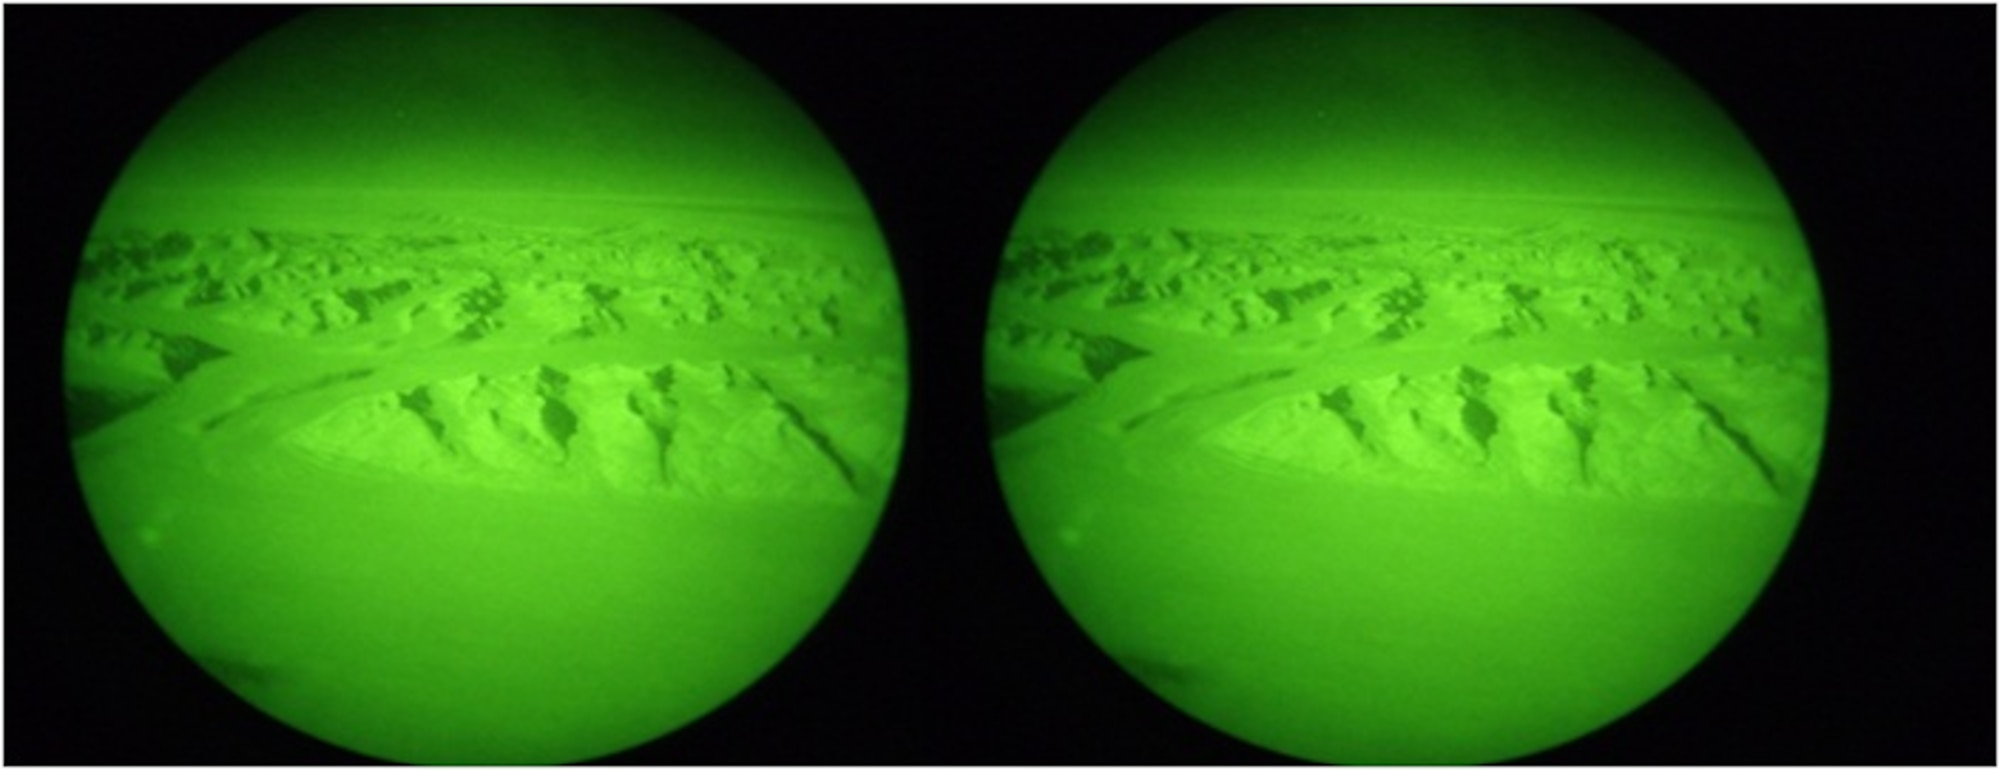 A view of Antarctica through the eyes of a pair of C-17 Globemaster III Night Vision Goggles at McMurdo Station, Antarctica, as part of Operation Deep Freeze 2010-2011. ODF is the U.S. military's operational and logistic support of the NSF's scientific research activities in Antarctica.  (U.S. Air Force photo/ Lt. Col. Robert Wellington)

